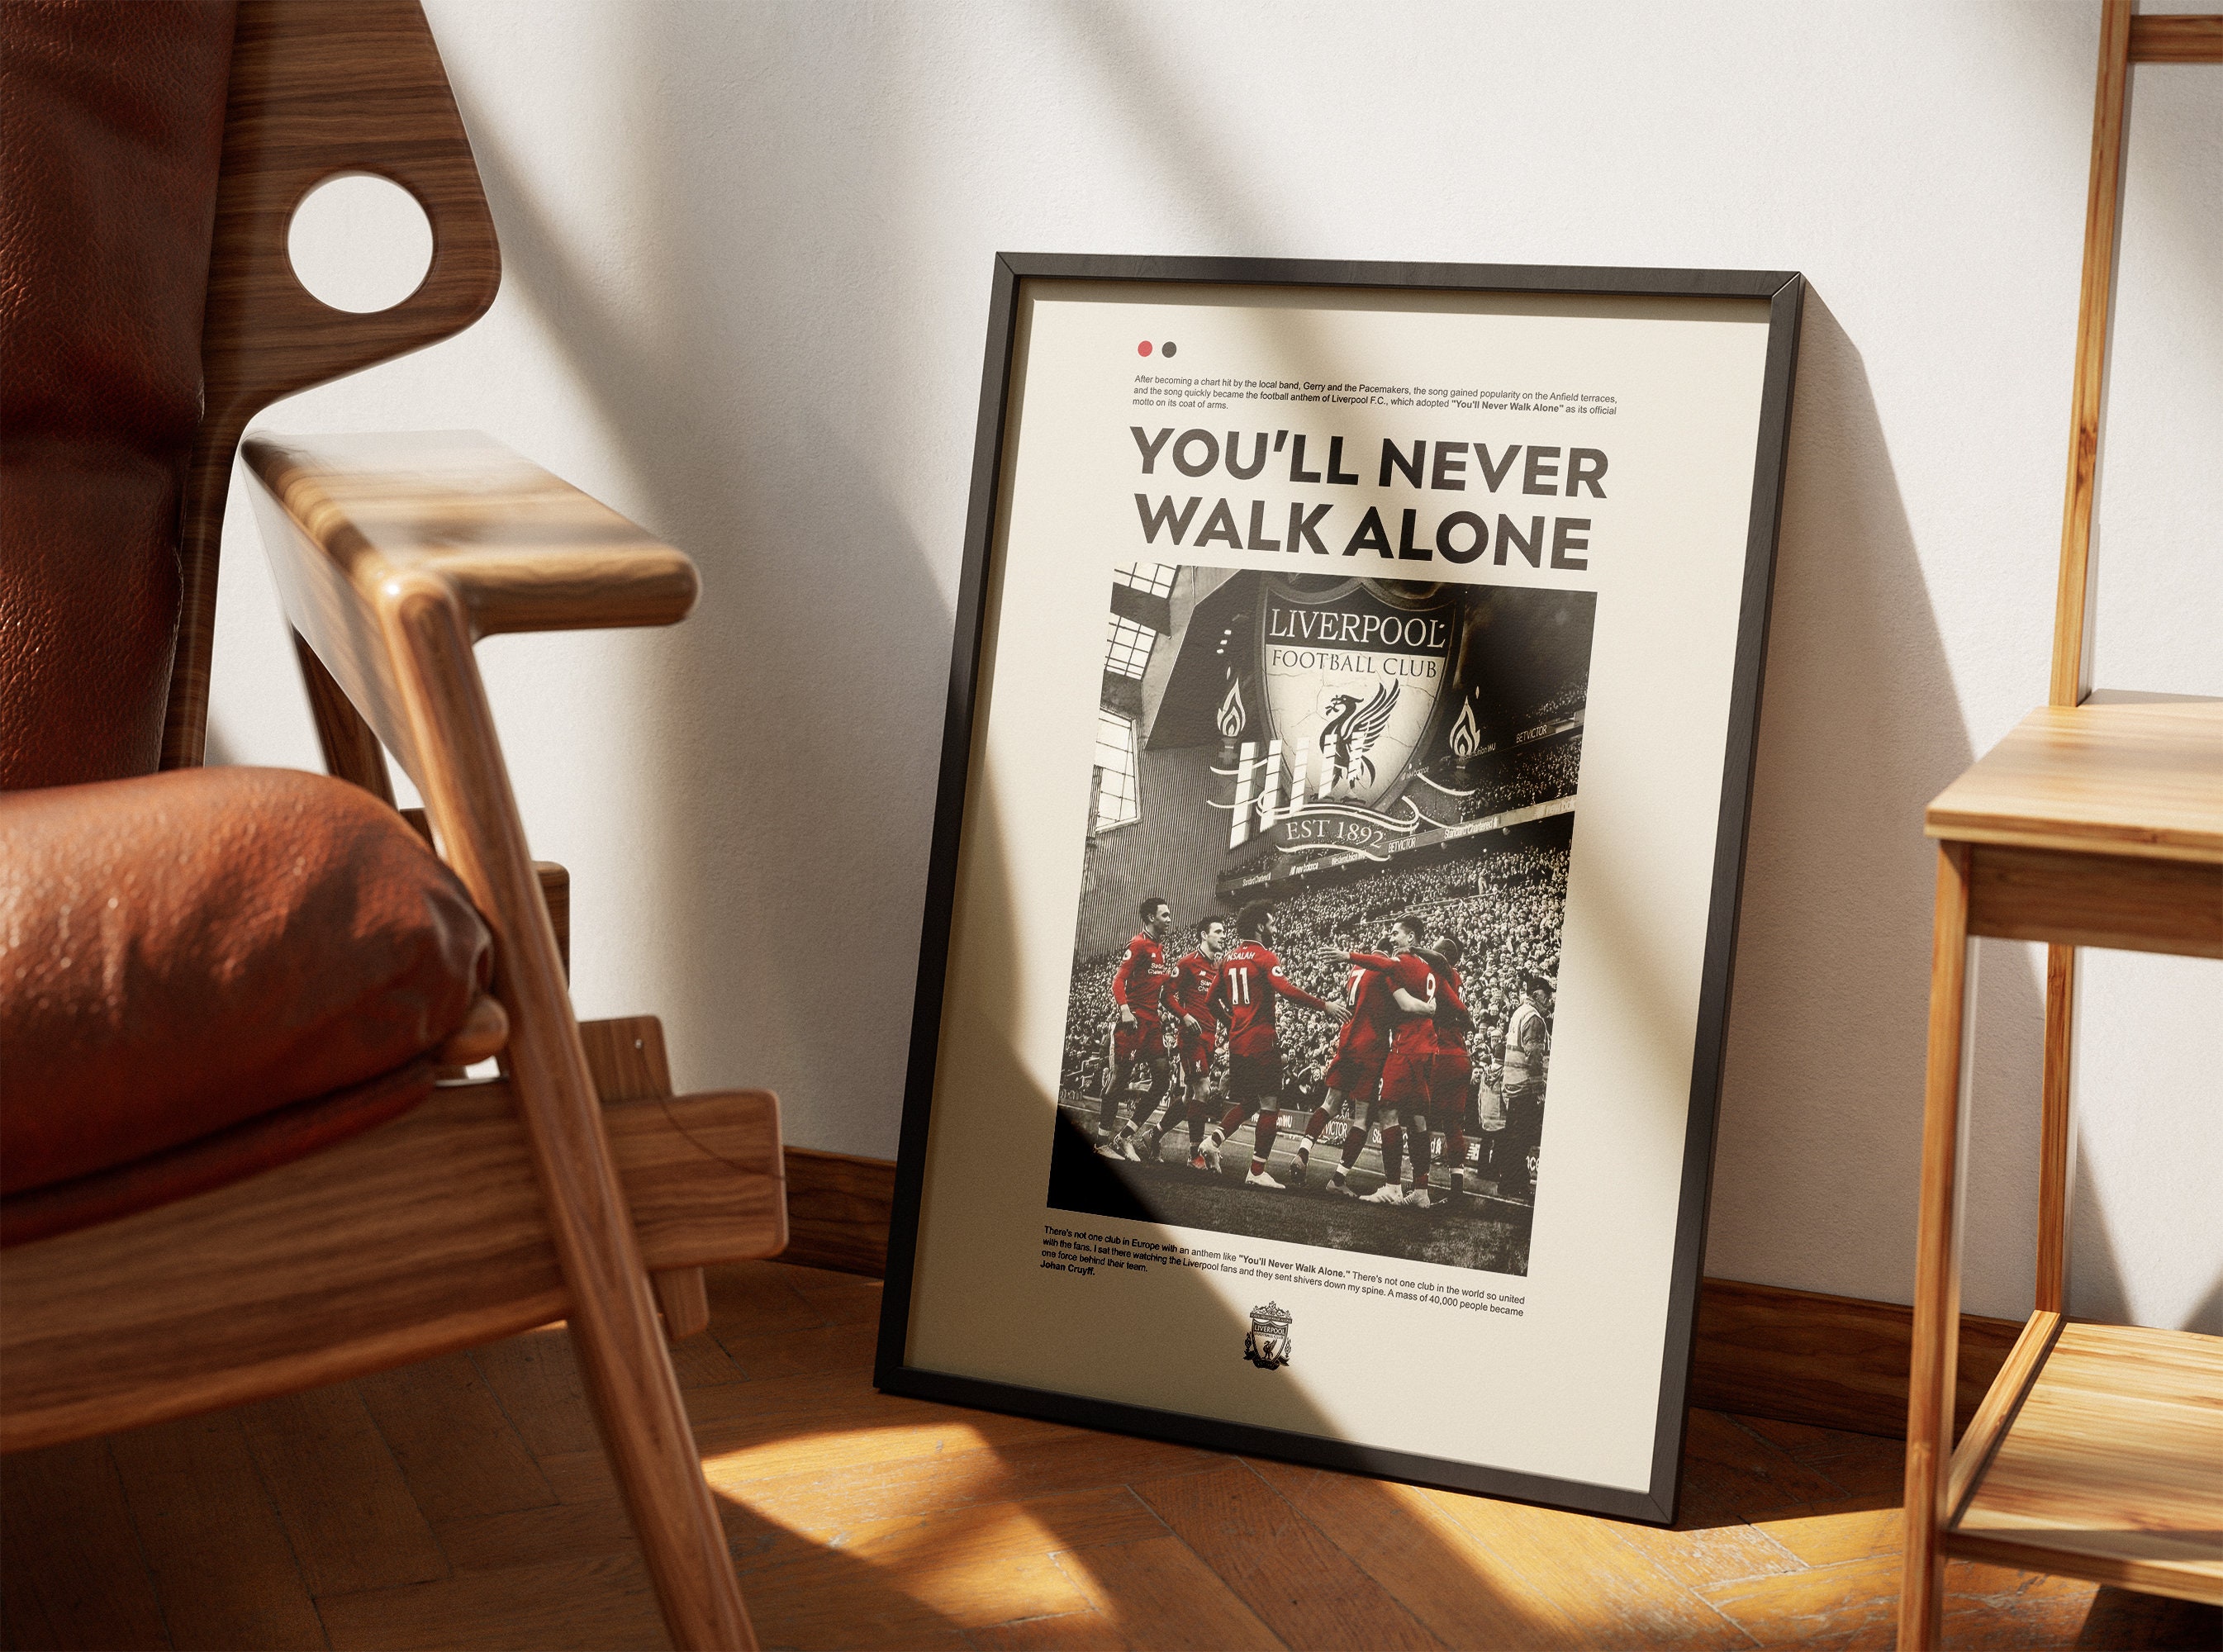 Discover Liverpool Poster, You'll Never Walk Alone Poster, Decor of Liverpool Fun, Liverpool Gift Poster, Liverpool Commemorative Poster